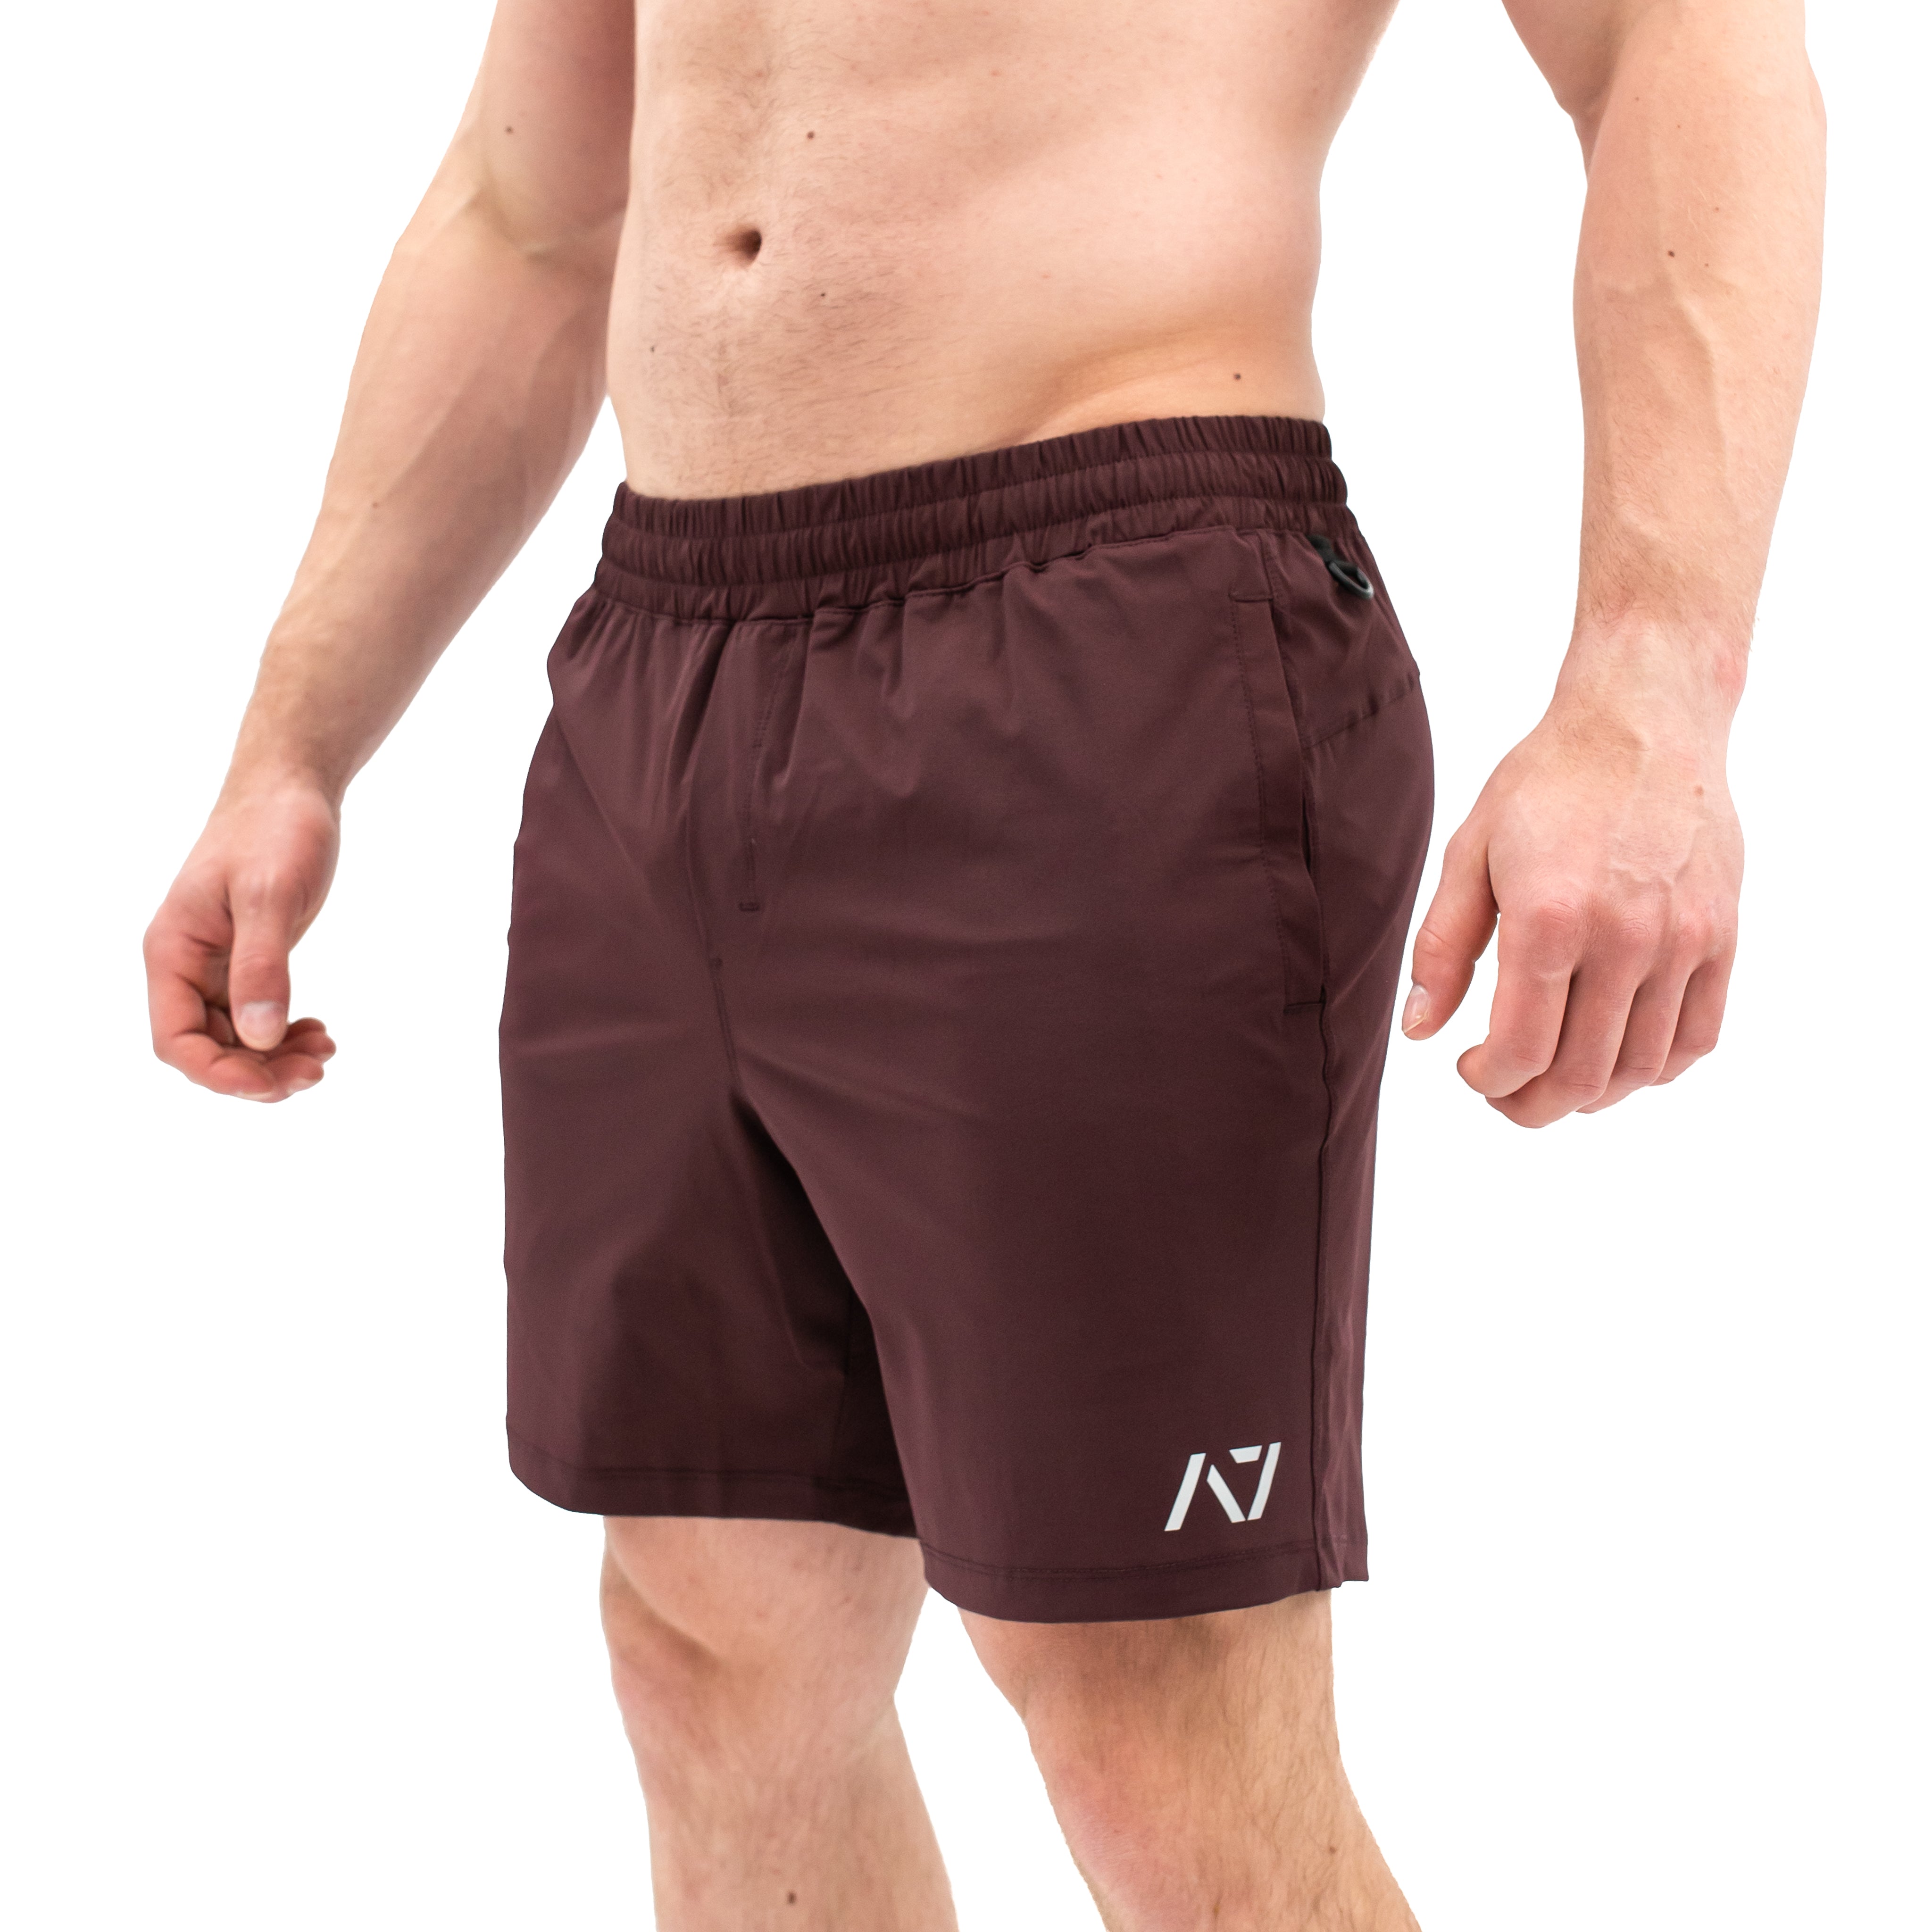 Mahogany 360-GO shorts were created to provide the flexibility for all the movements in your training while offering the comfort and fit you have come to love through our Centre Squat shorts. Purchase 360-GO Squat shorts from A7 UK and A7 Europe. 360-GO shorts are perfect for powerlifting and weightlifting training. Available in UK and Europe including France, Italy, Germany, the Netherlands, Sweden and Poland.